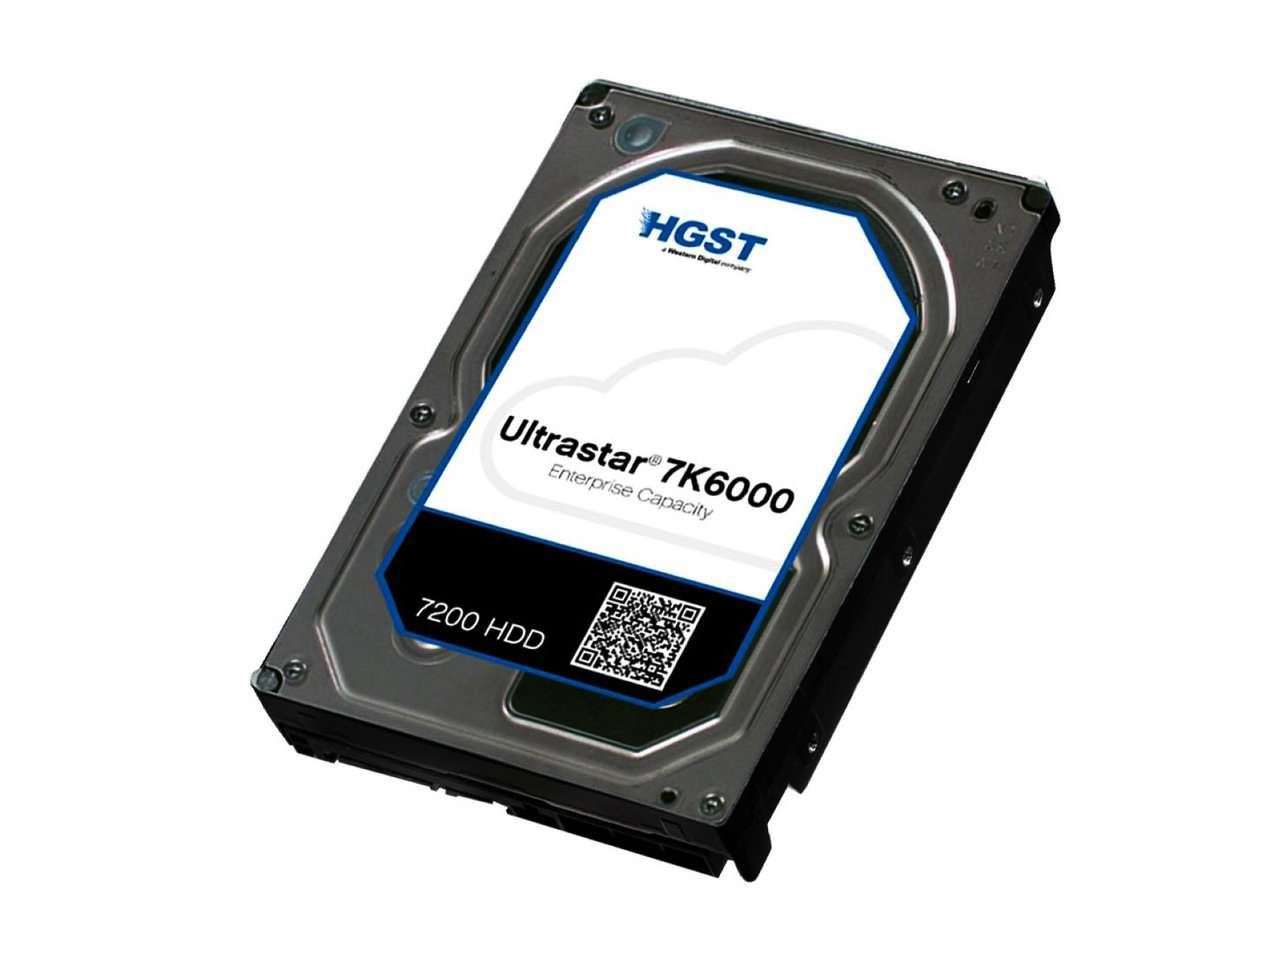 HGST Ultrastar 7K6000 0F22941  HUS726040ALS210 4TB 7.2K RPM SAS 12Gb/s 512n 128MB Cache 3.5" ISE HDD